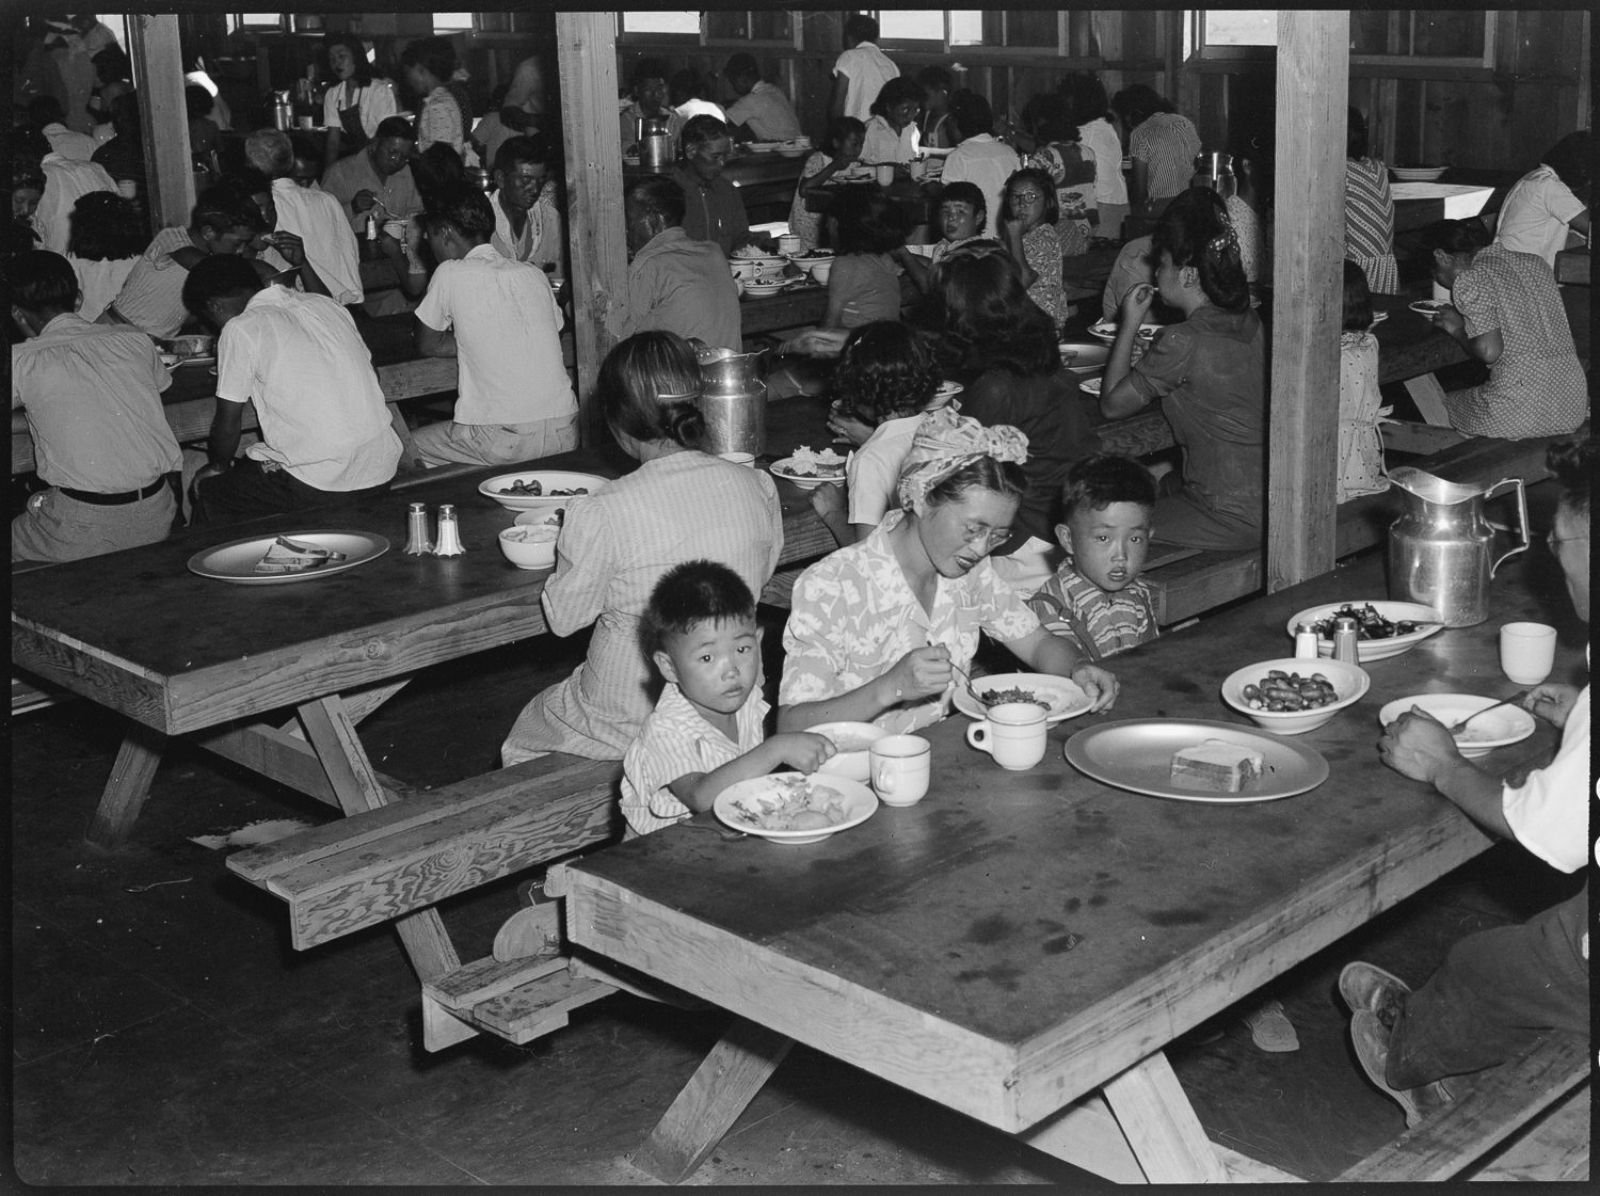 A Look Back At Japanese Internment Camps In The Us 75 Years Later Photos Image 71 Abc News